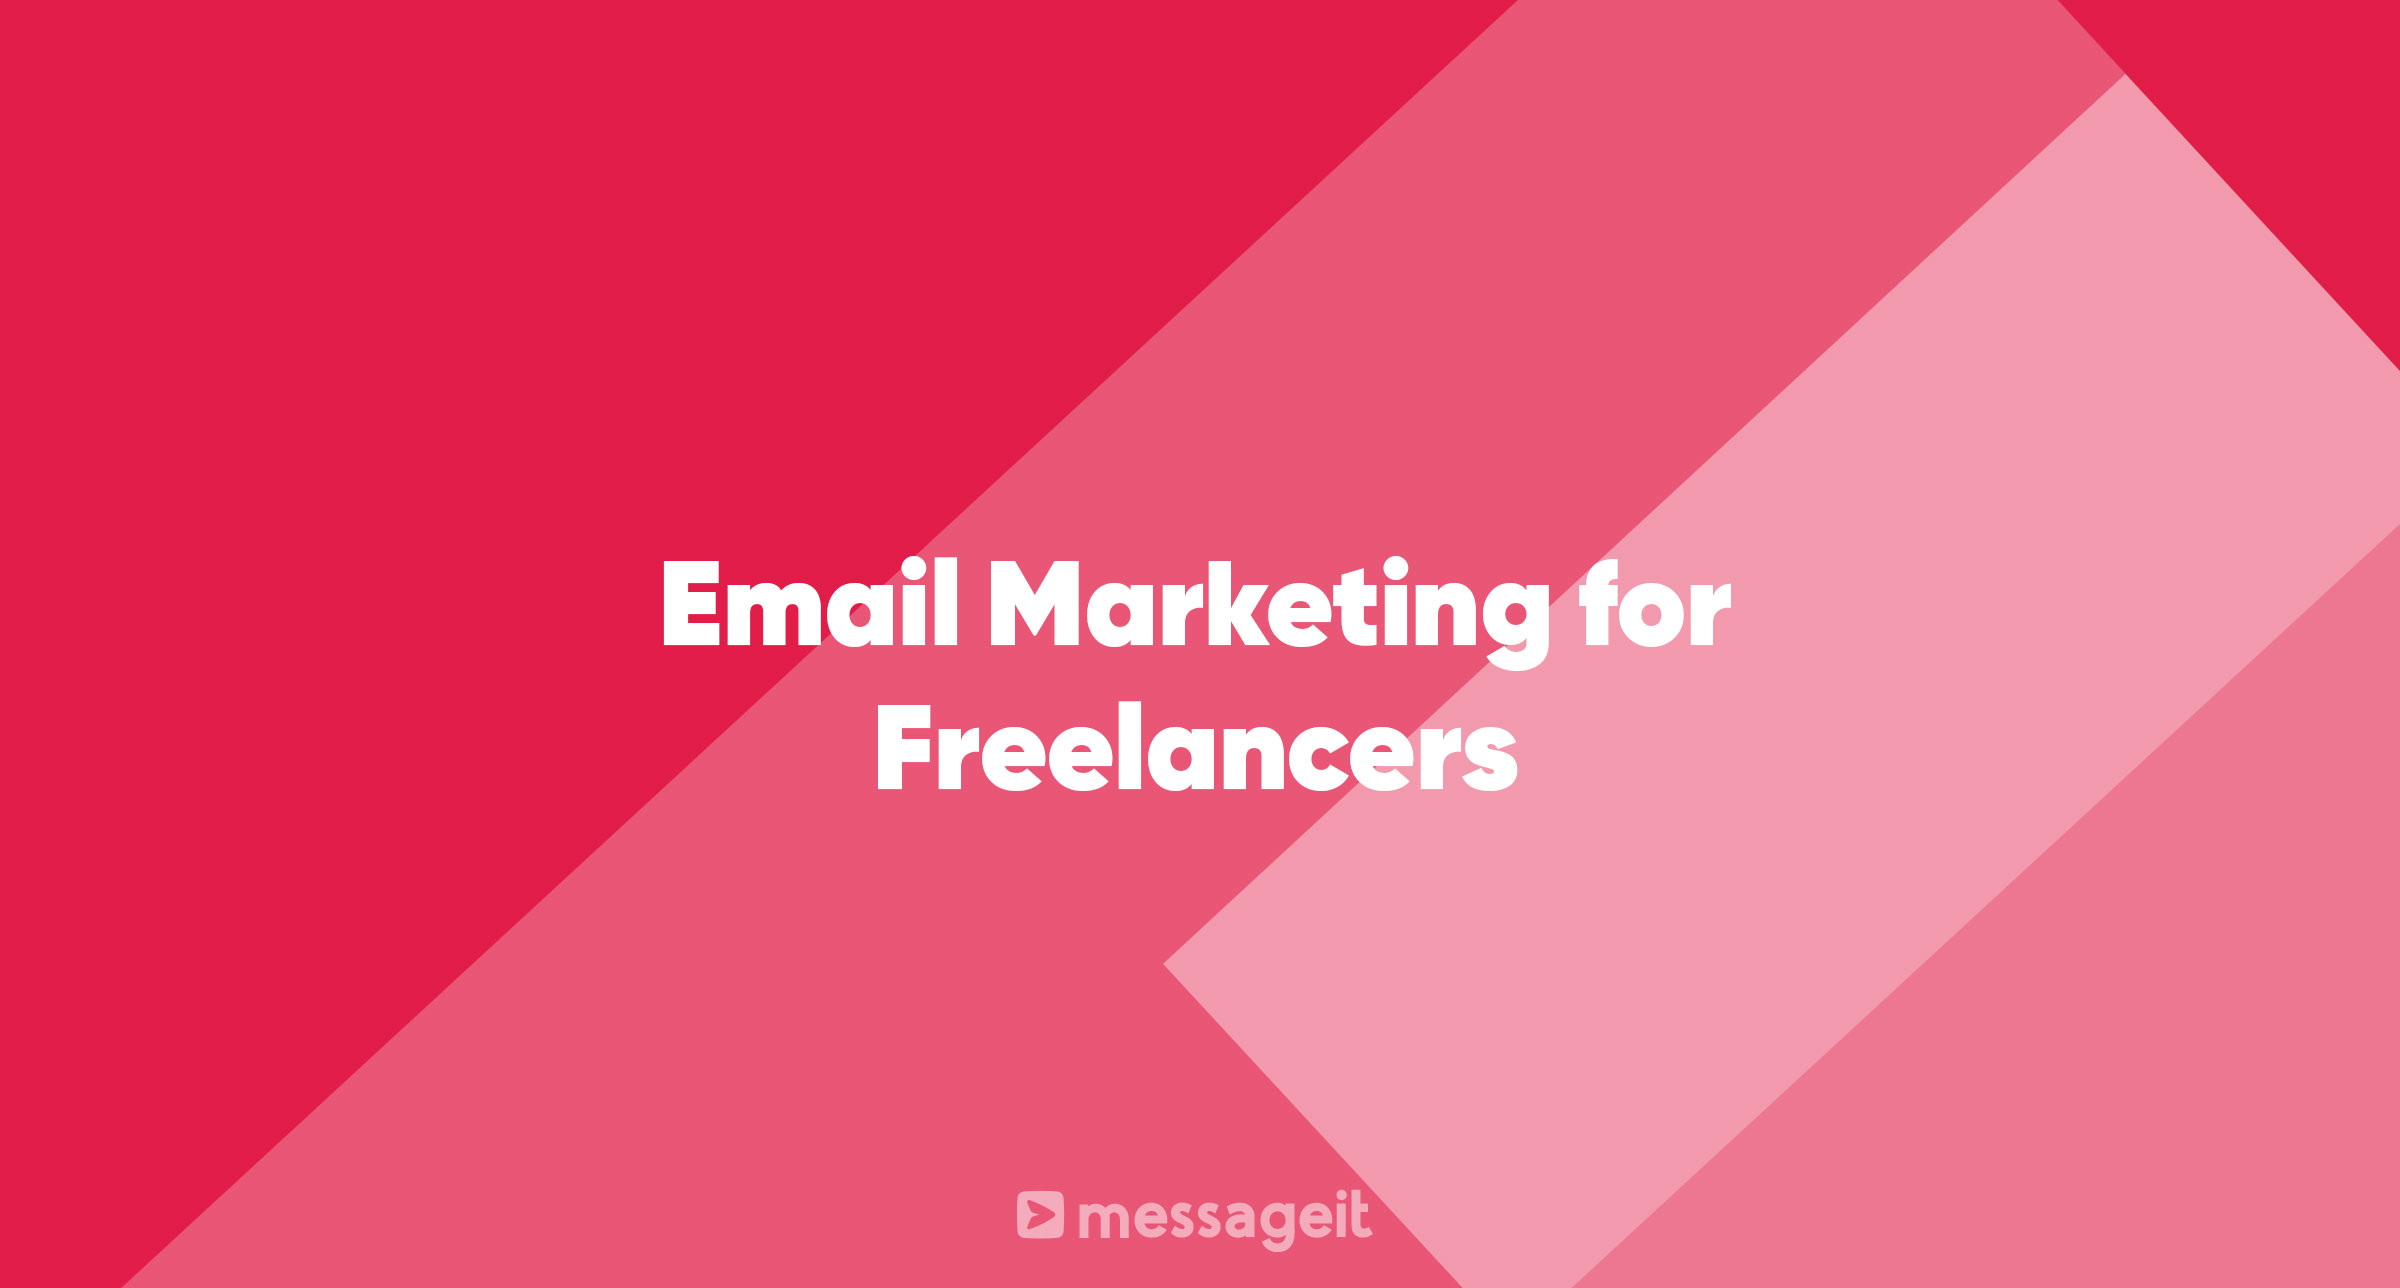 Article | Email Marketing for Freelancers